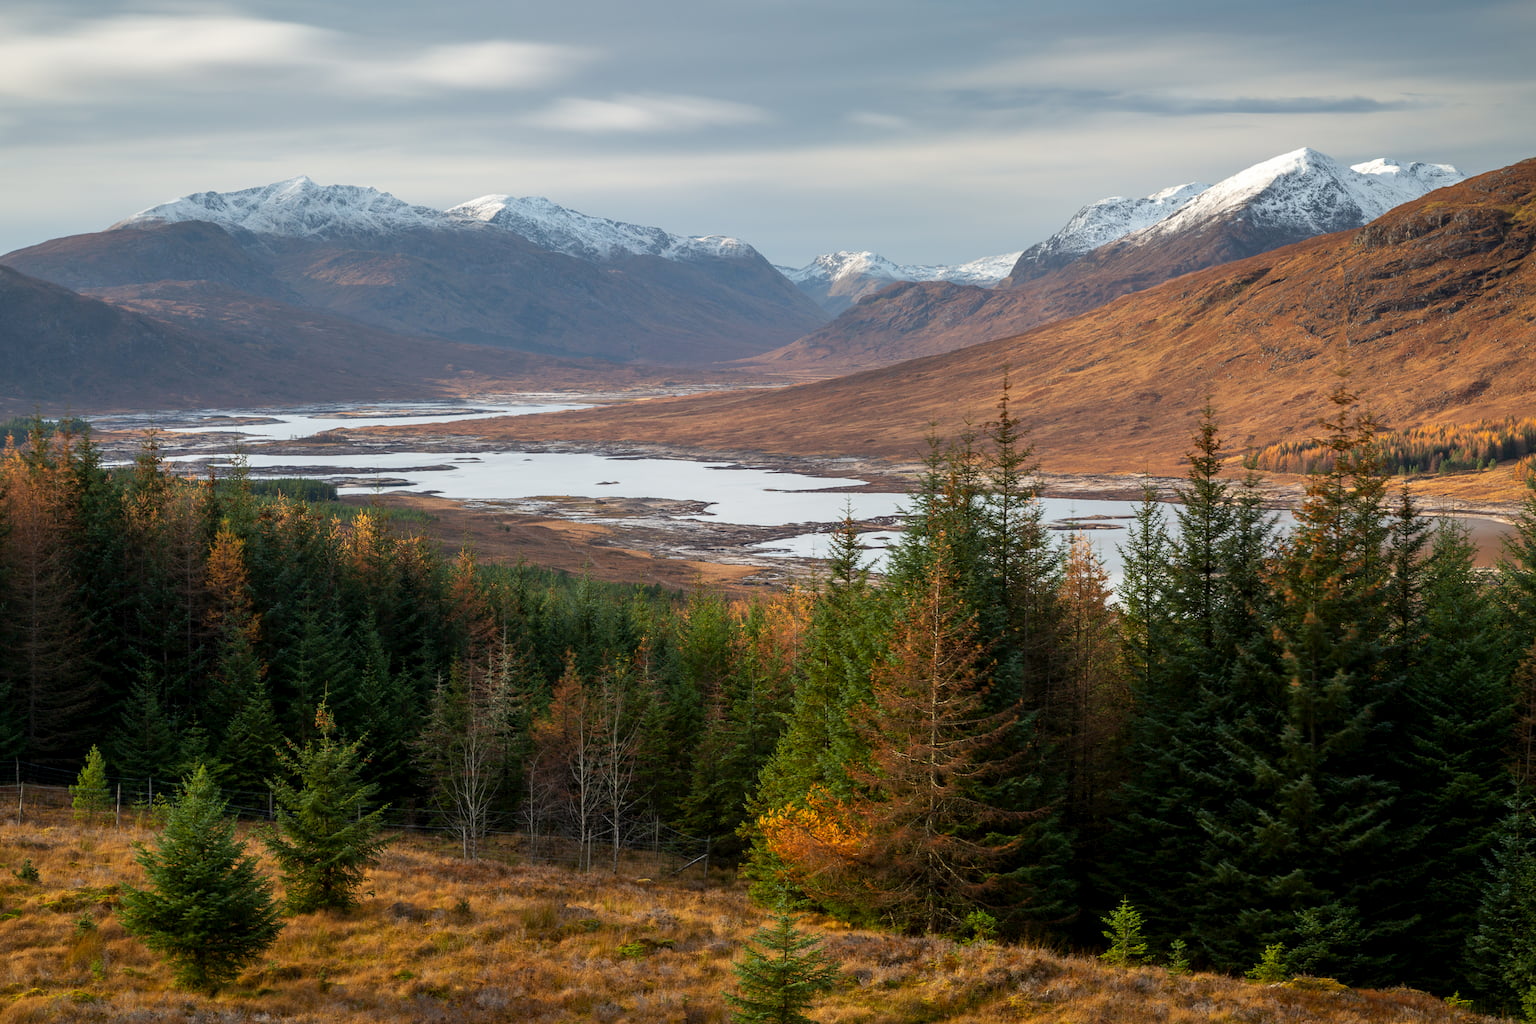 Lock Loyne in Scotland on an autumn day with snow capped mountains in the background.